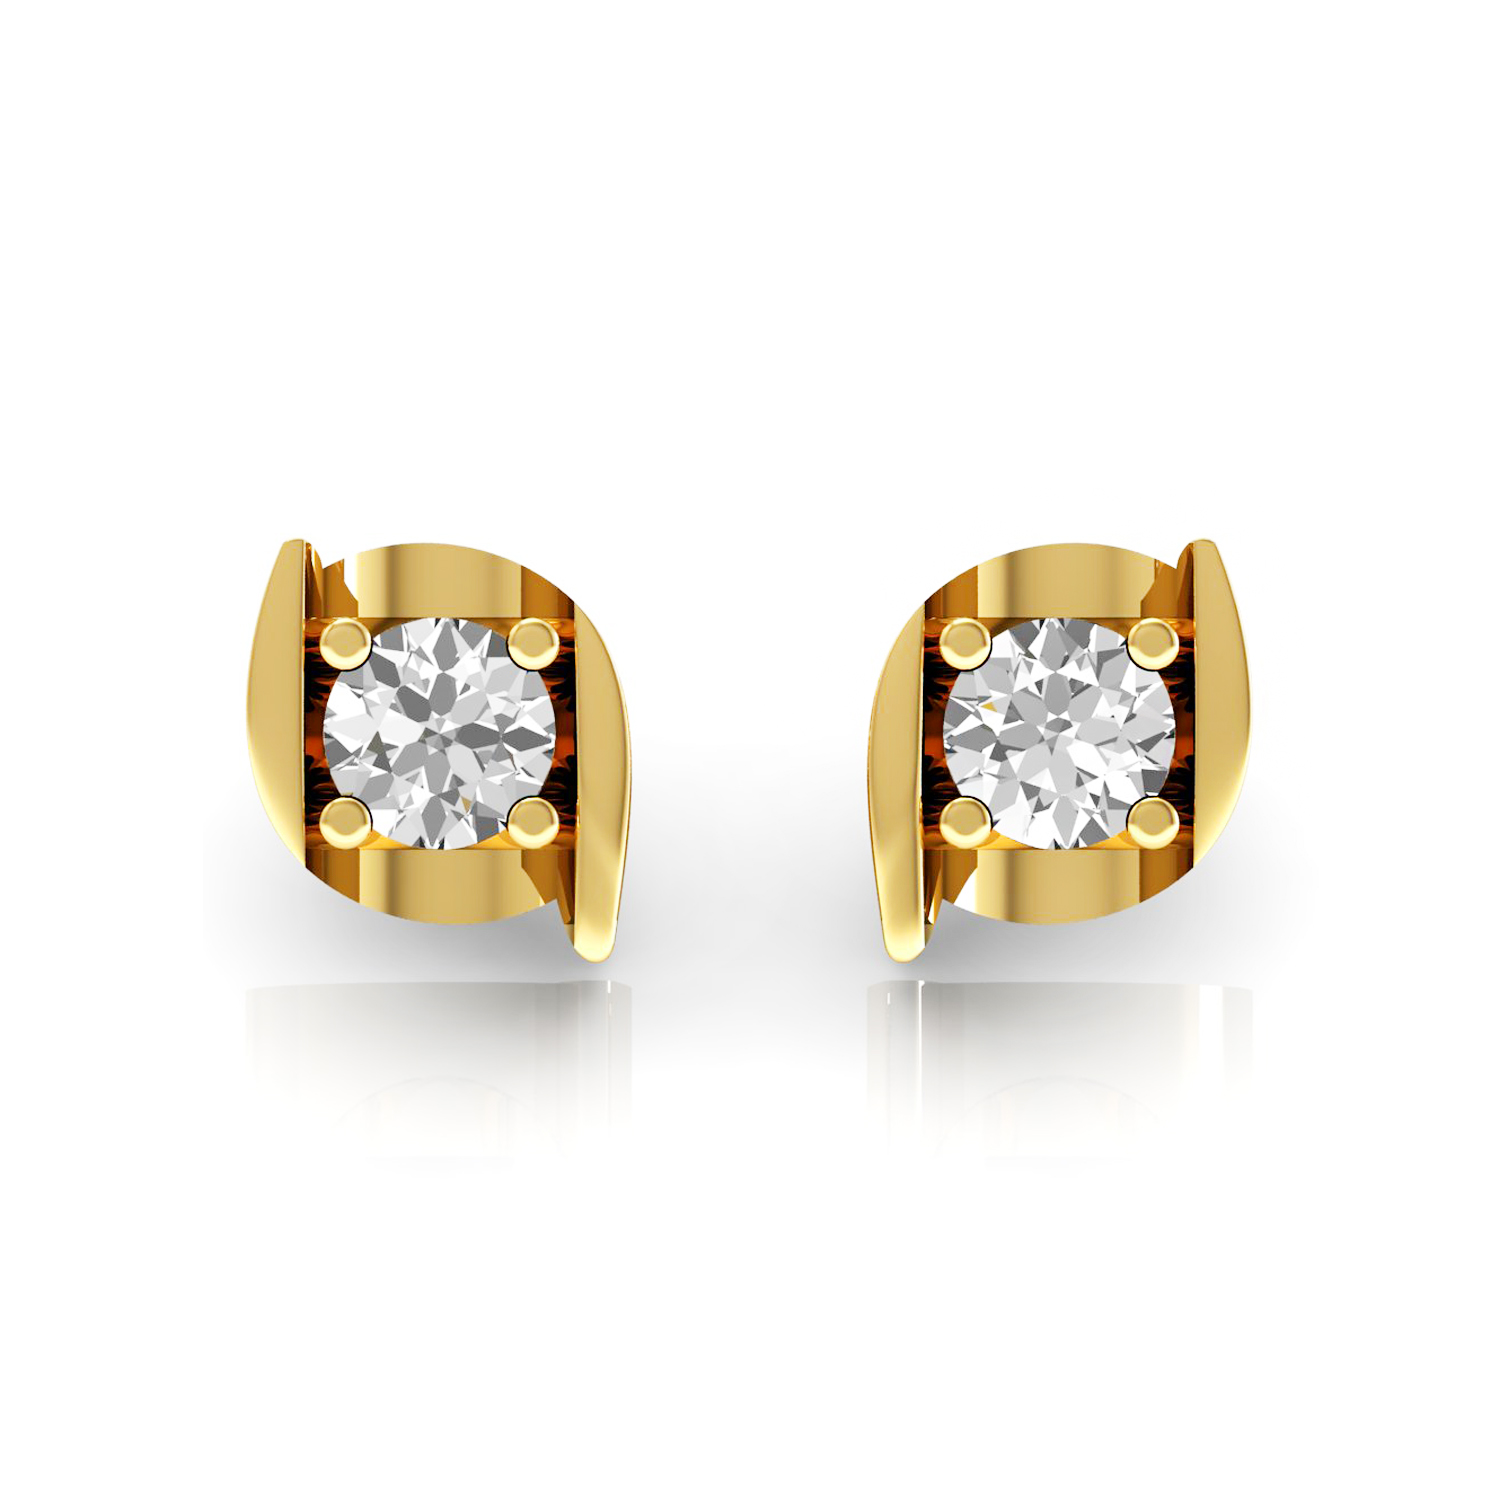 Authentic Diamond Solid Gold Stud Earrings Fine Jewelry